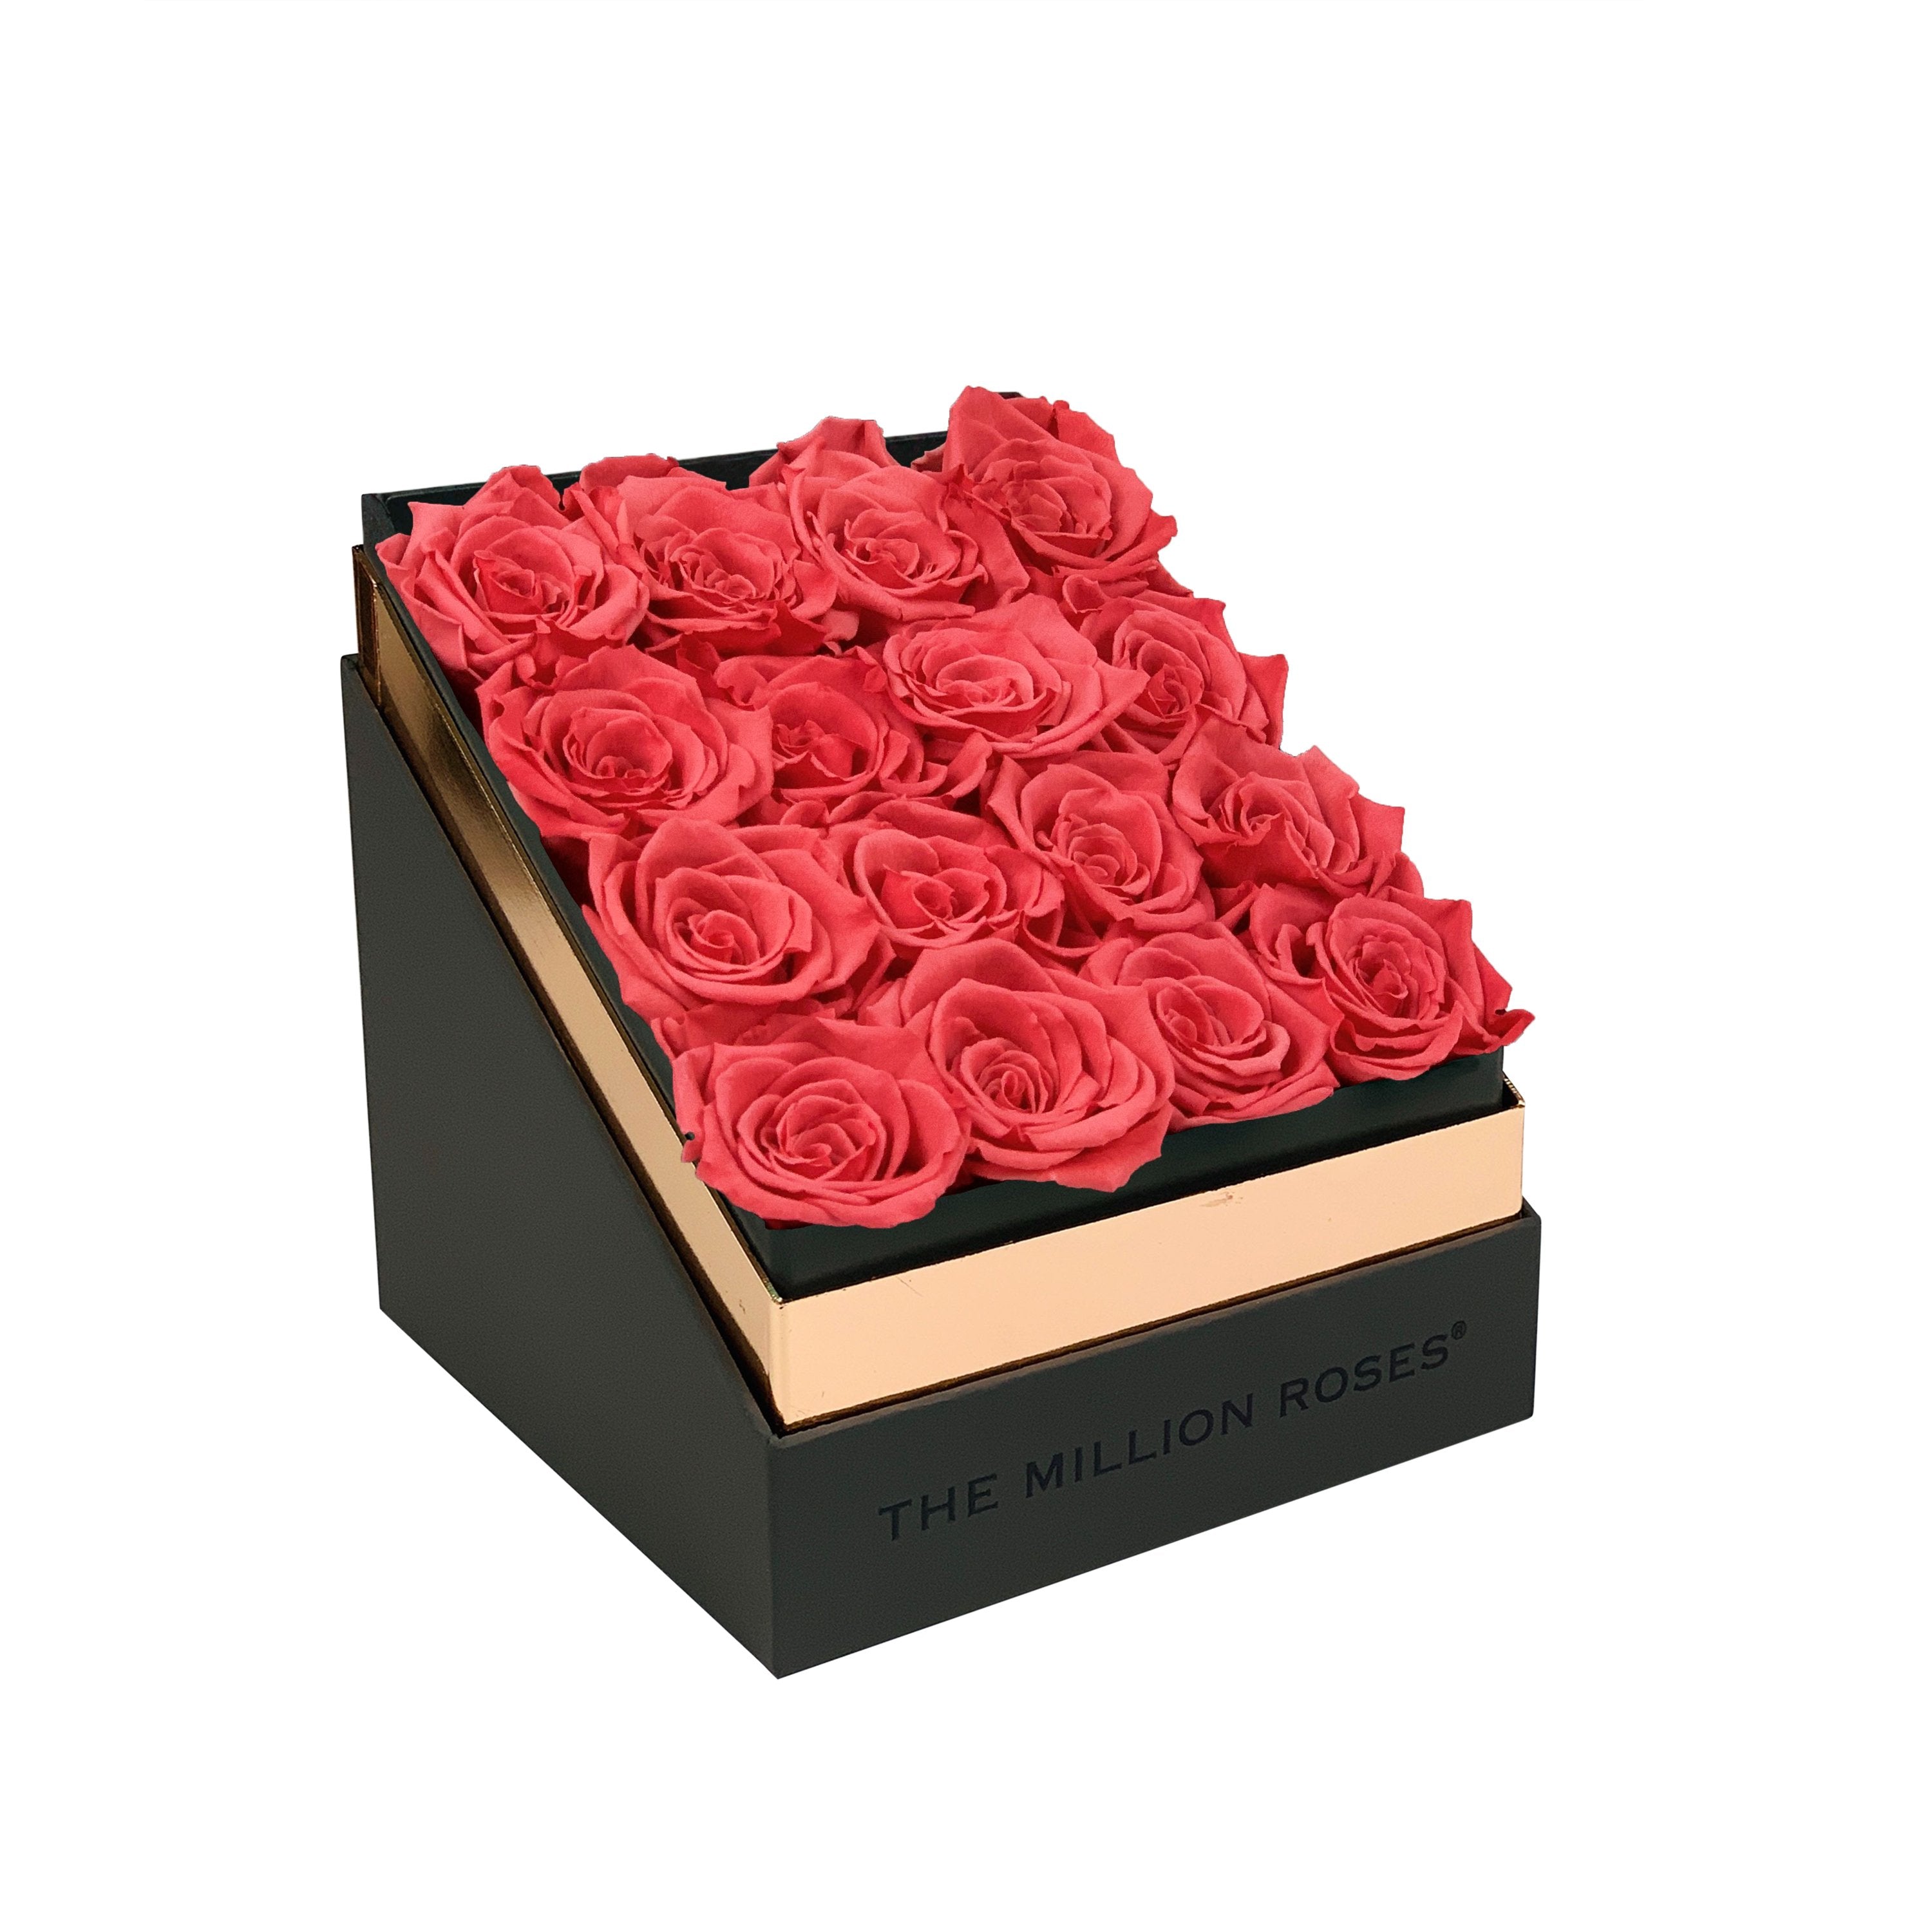 The Square - Gray Box - Coral Roses